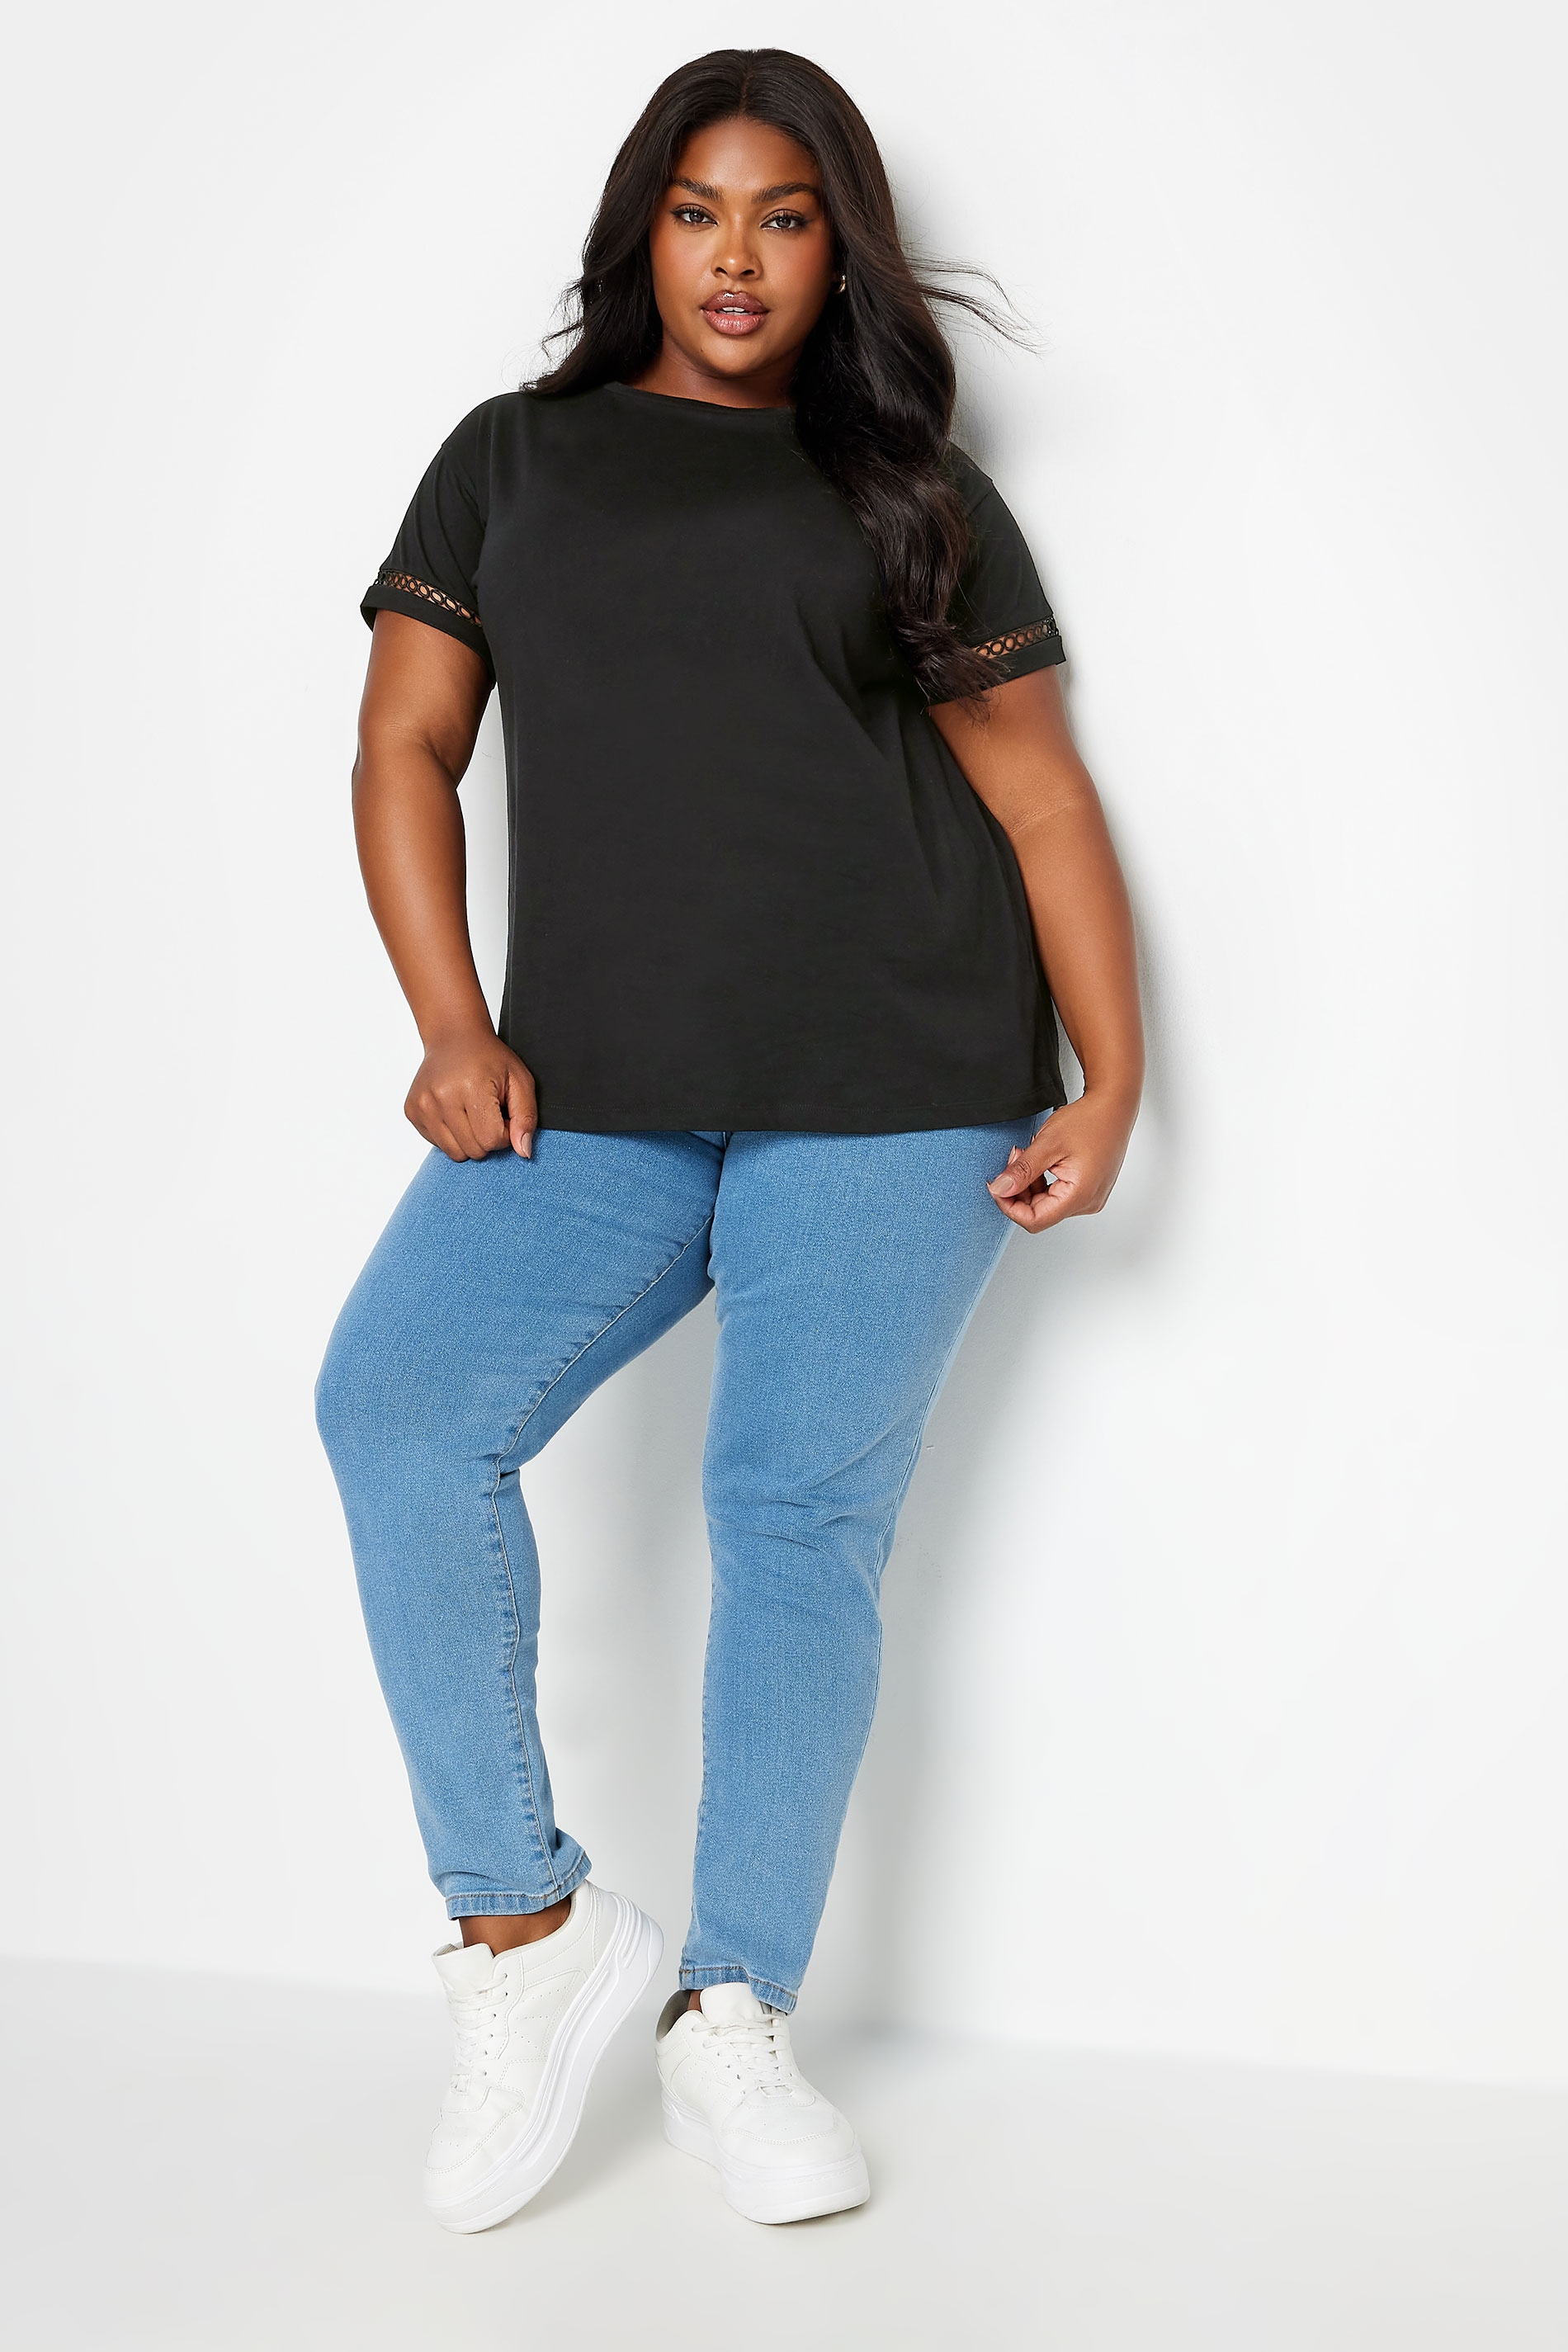 LIMITED COLLECTION Plus Size Black Crochet Trim Short Sleeve T-Shirt | Yours Clothing 2